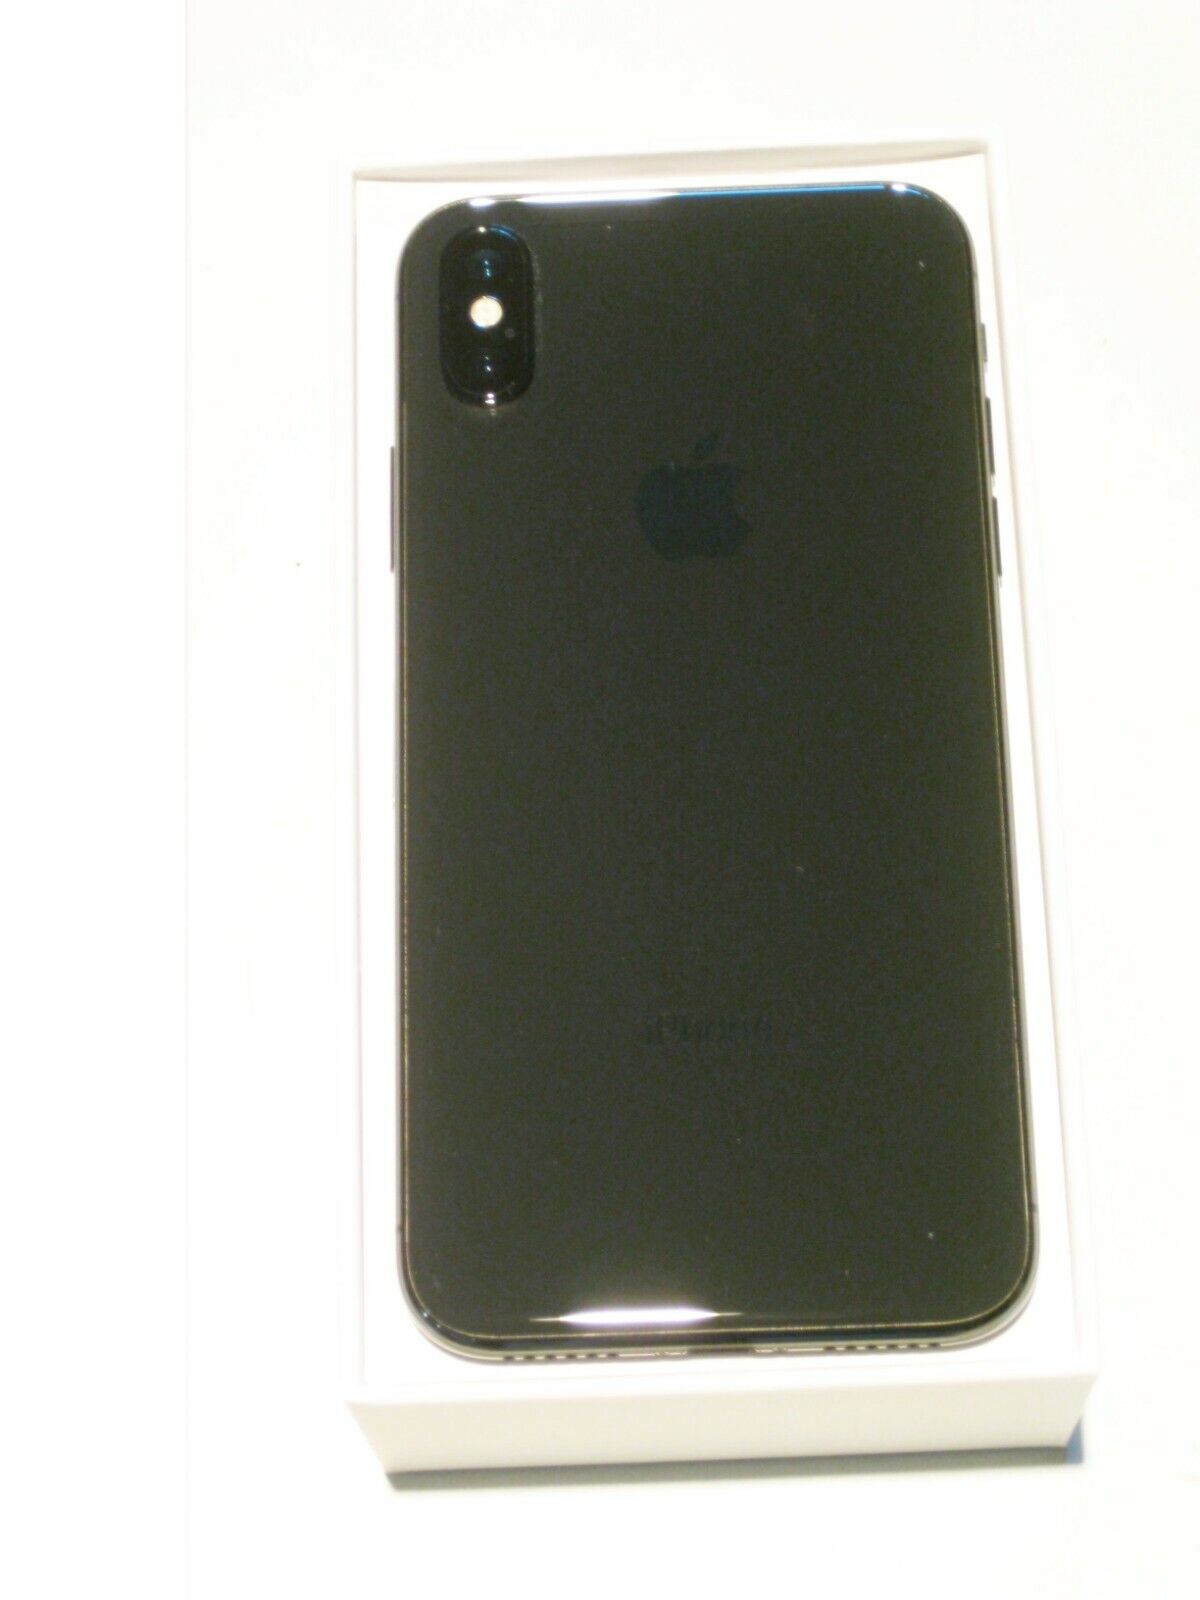 Apple iPhone X - 256 GB - Space Gray (Sprint) for sale online | eBay